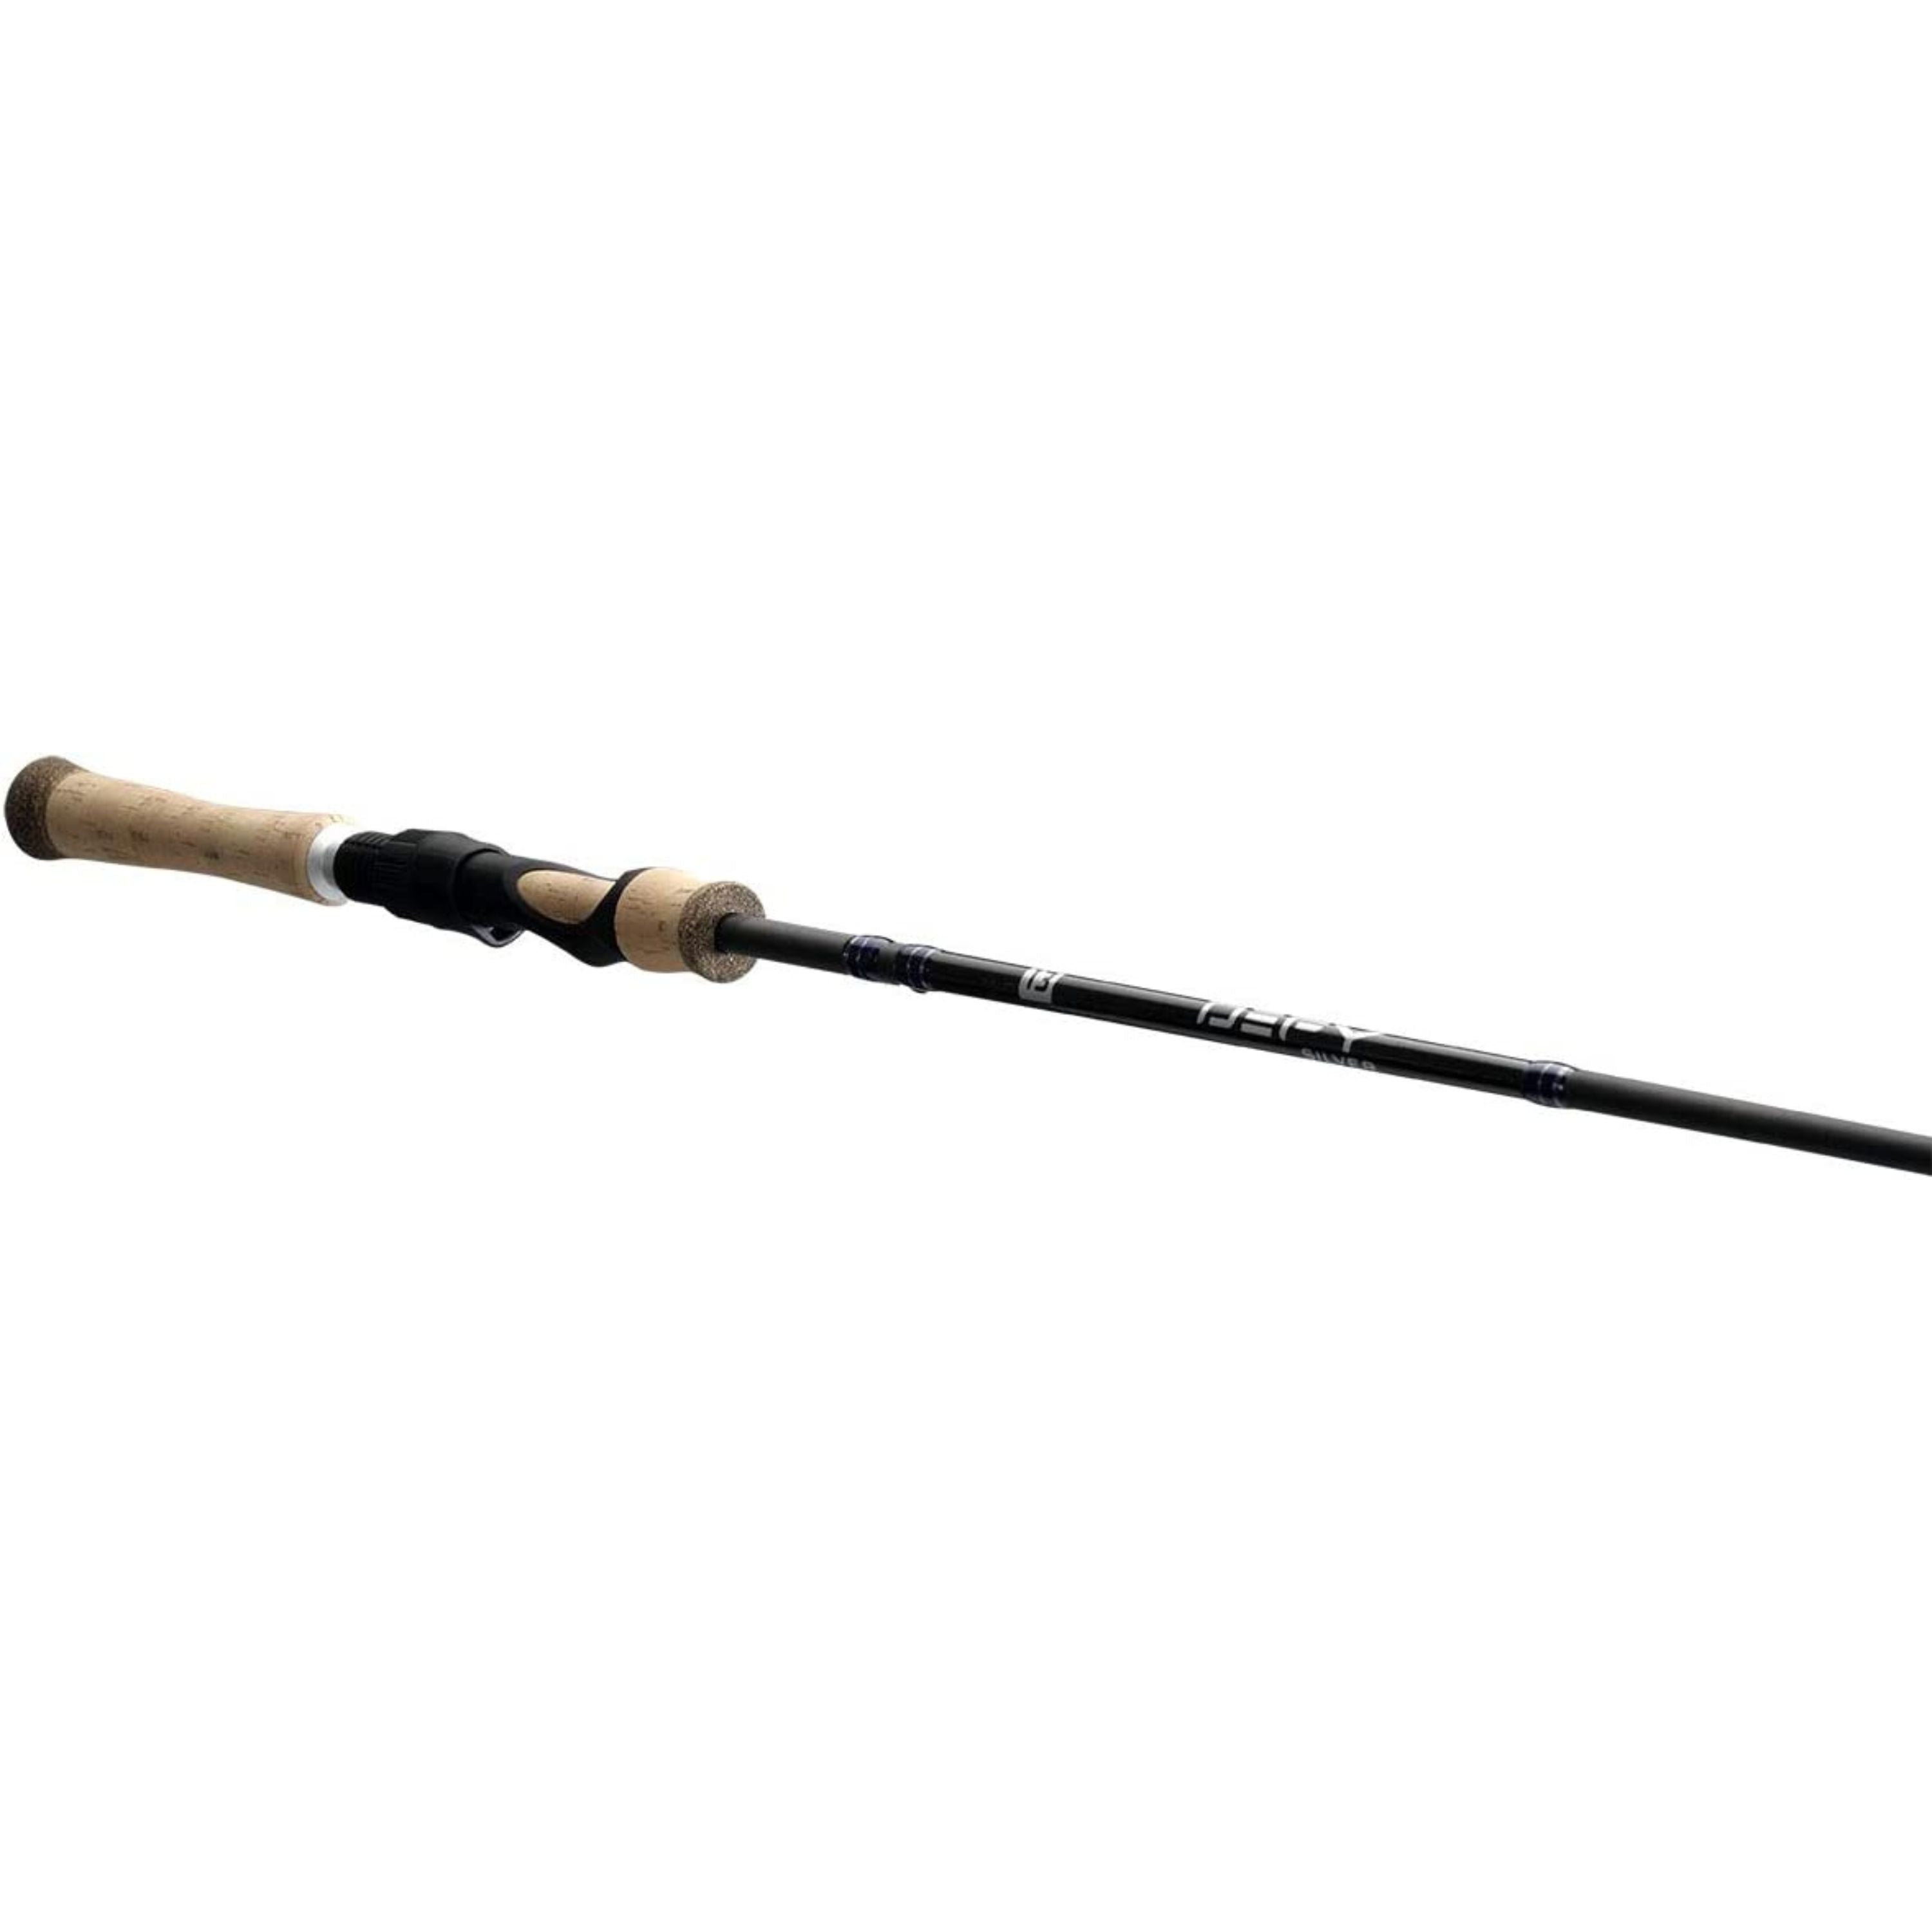 Defy Silver Spinning rod — Groupe Pronature